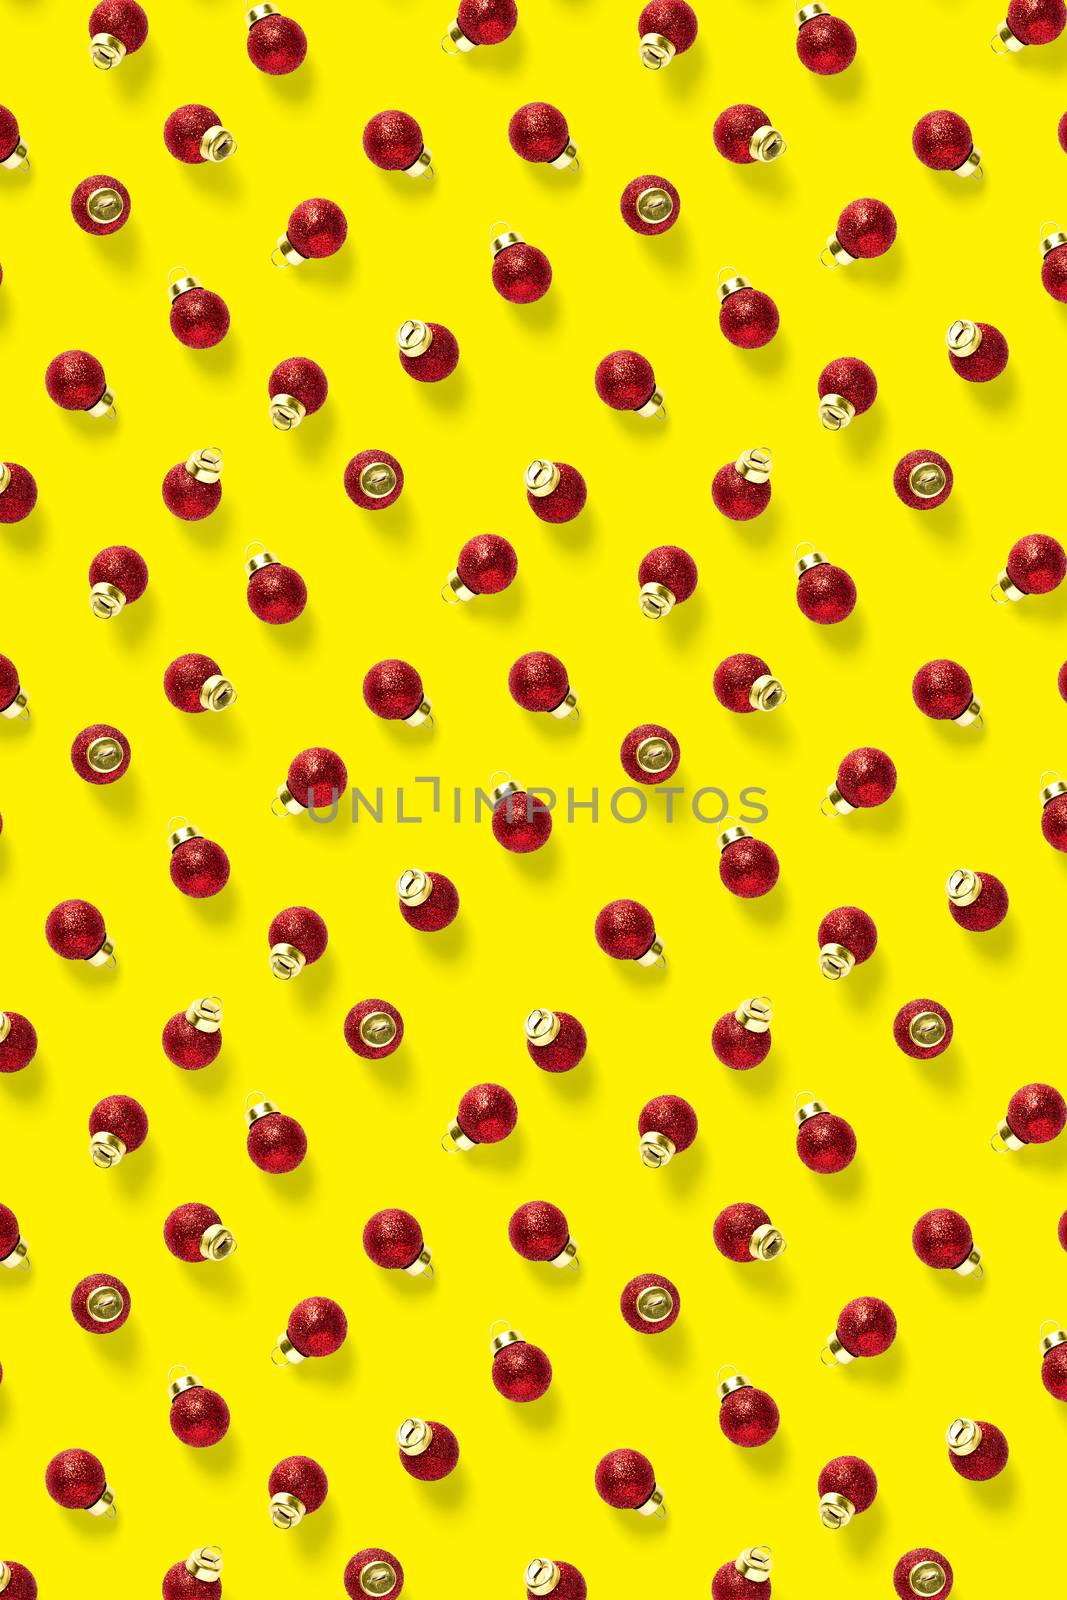 Christmas red decorations on yellow background. Christmas ornaments composition for background. Flat lay of red ornaments by PhotoTime